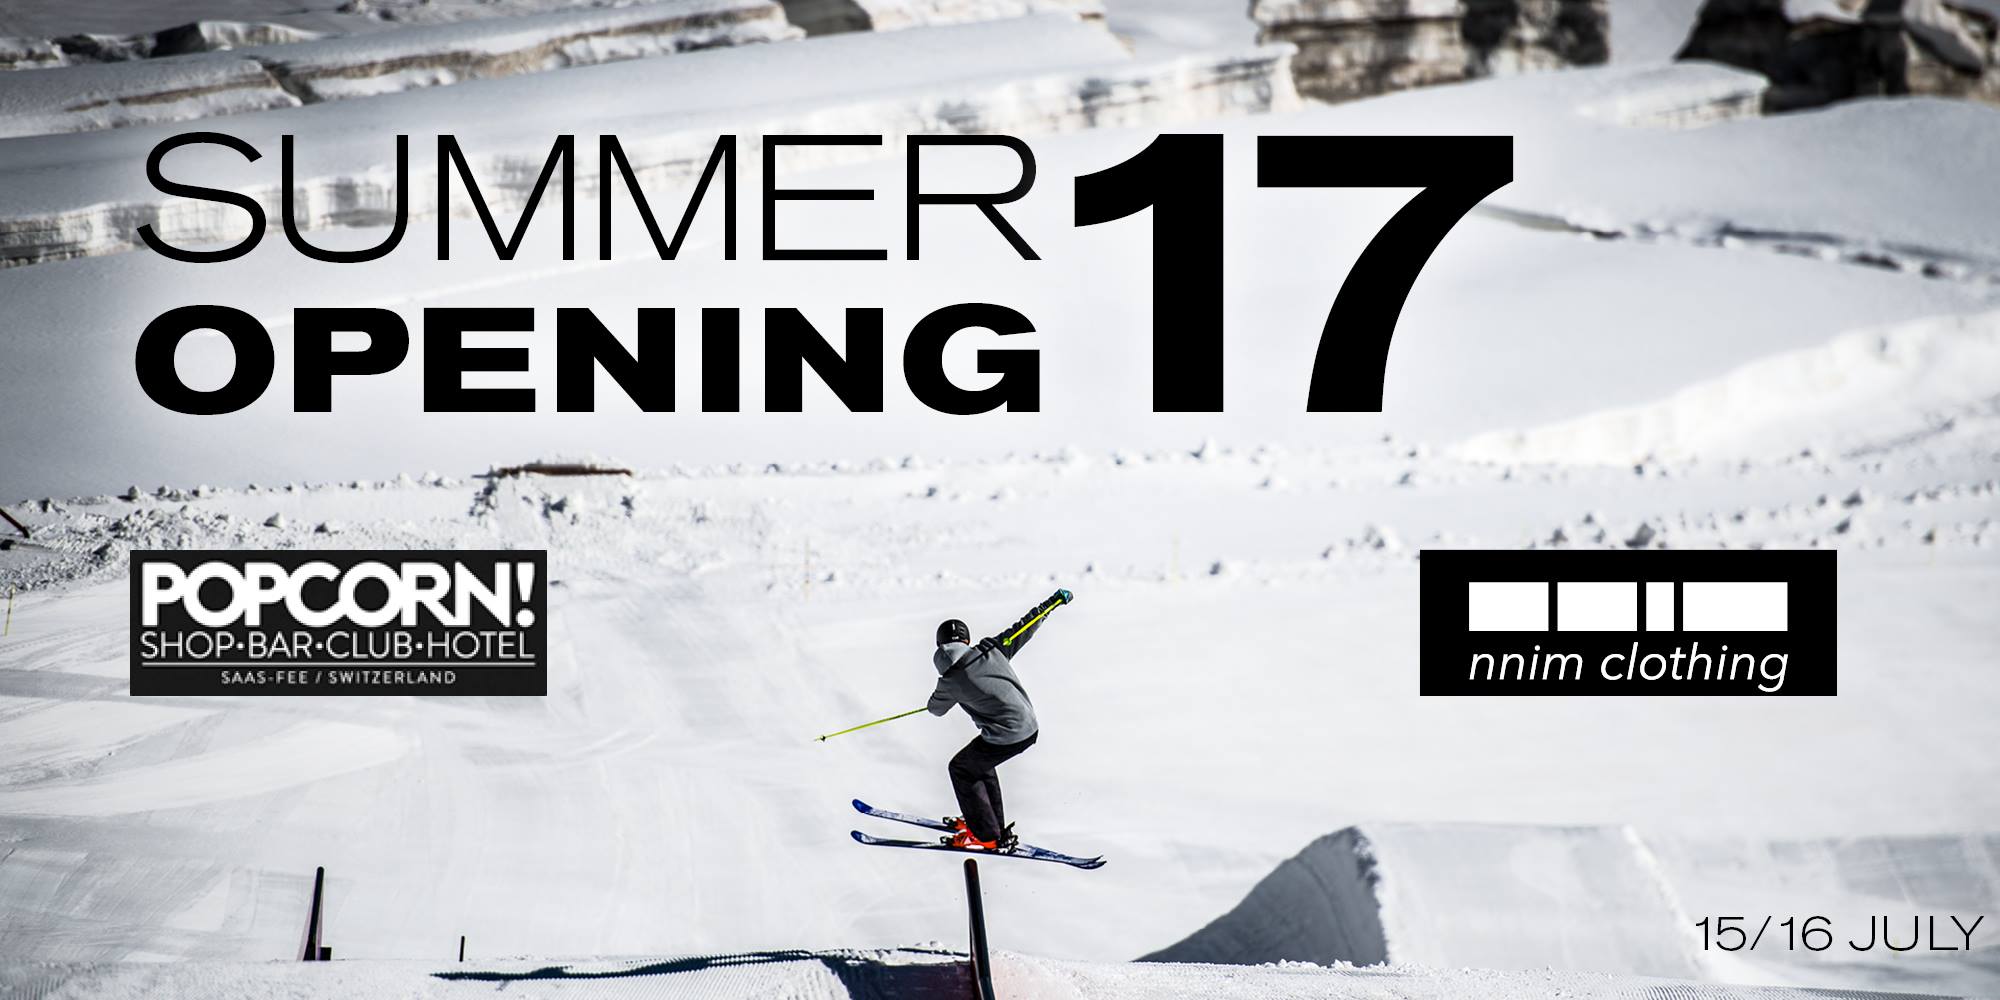 Where To Ski or Snowboard in Switzerland in July 2017?